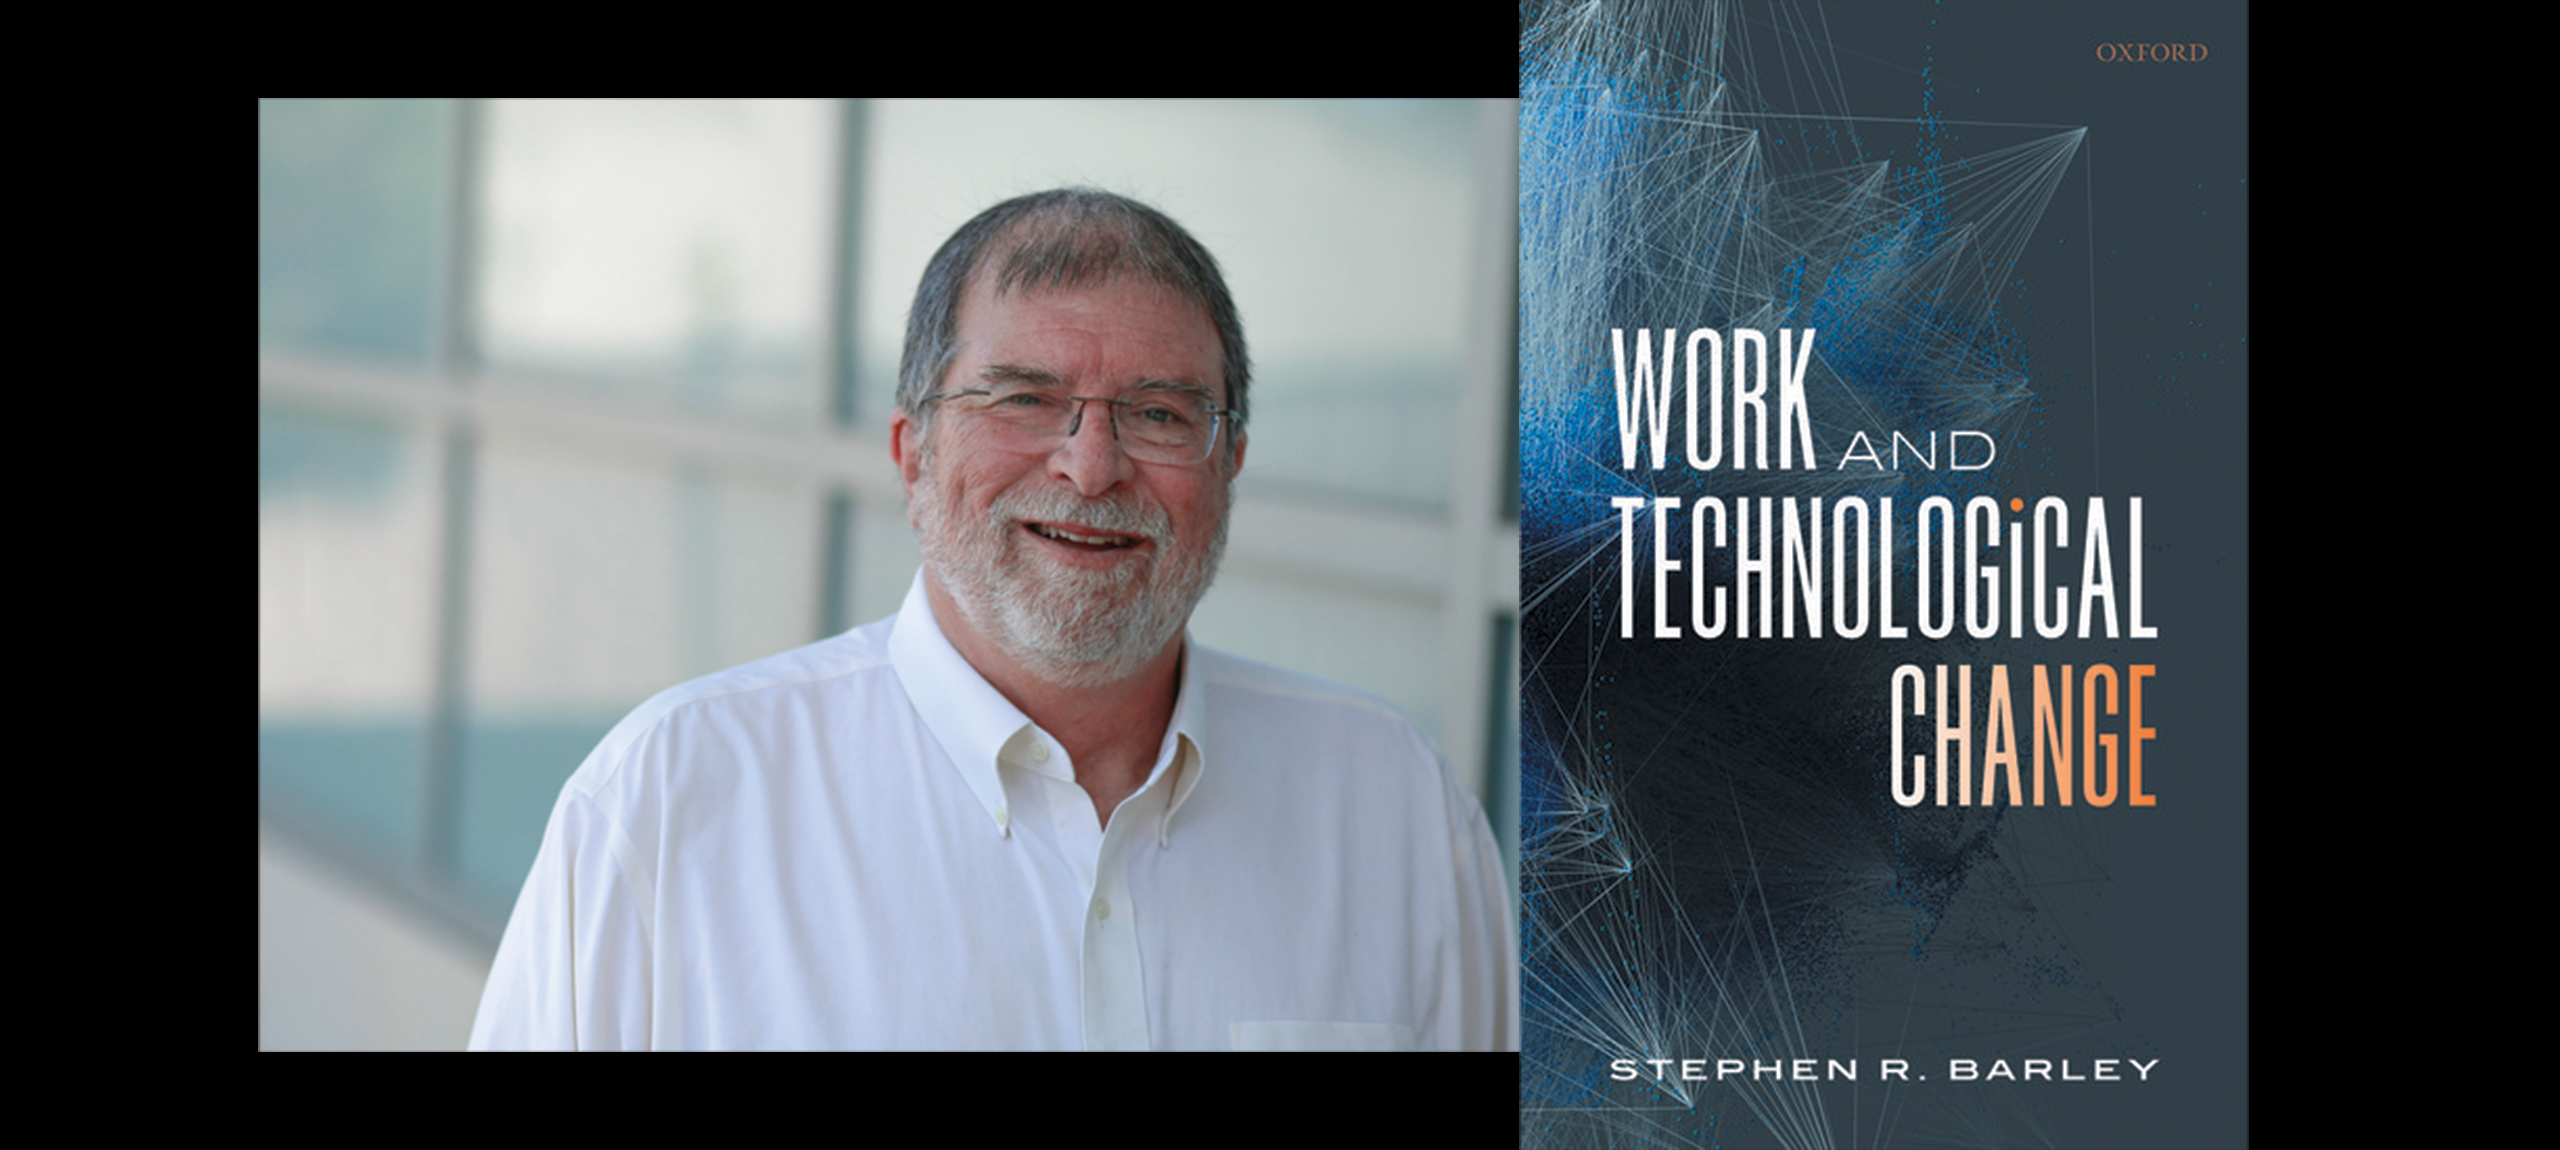 Headshot of Steve Barley along with the cover of his book, "Work and Technological Change"